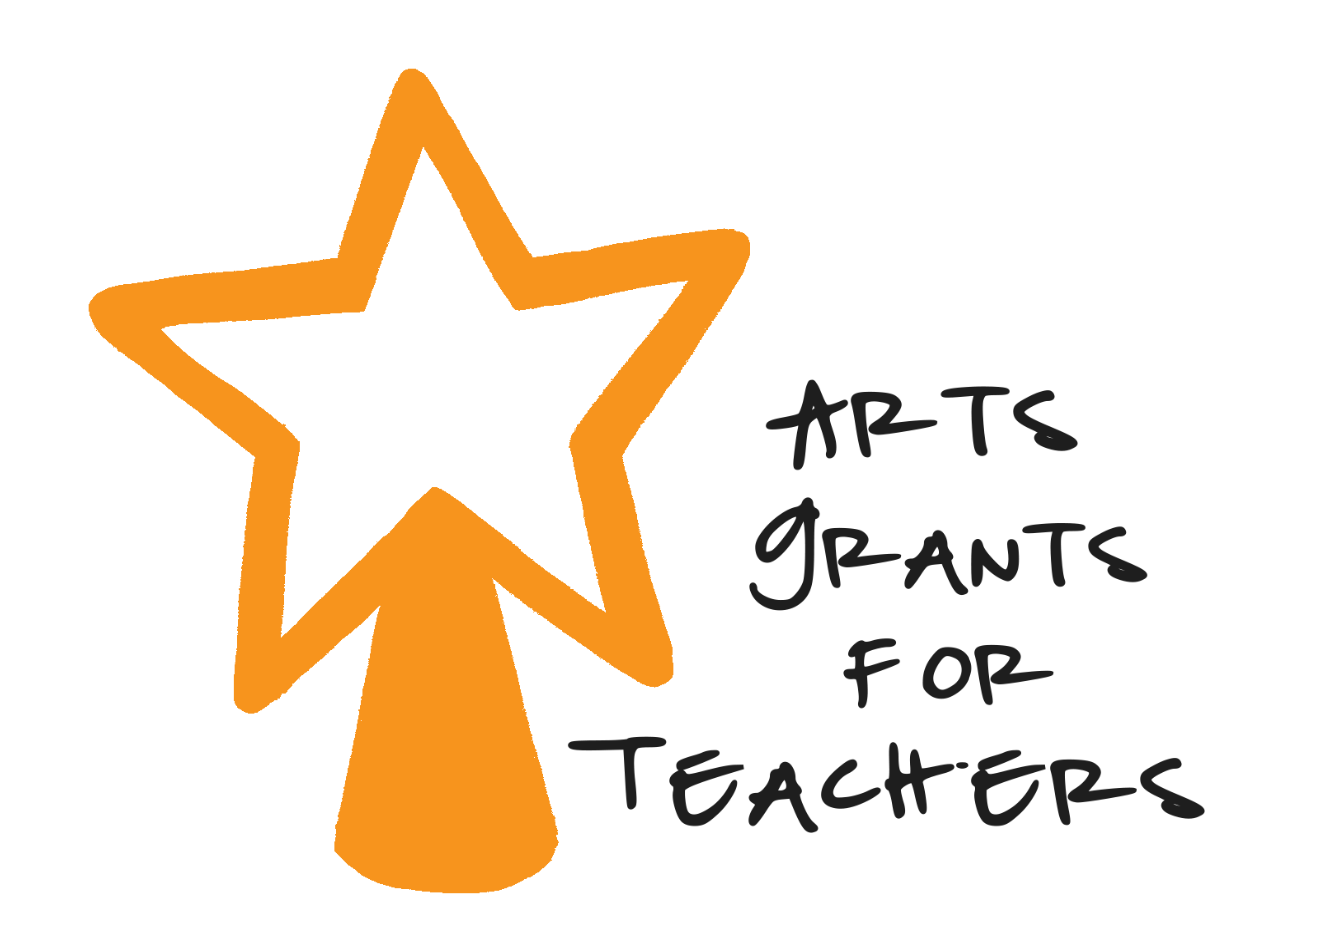 United Way of Acadiana And Acadiana Center For the Arts Launch Grants For Teachers to Provide Funding for Arts & Innovation